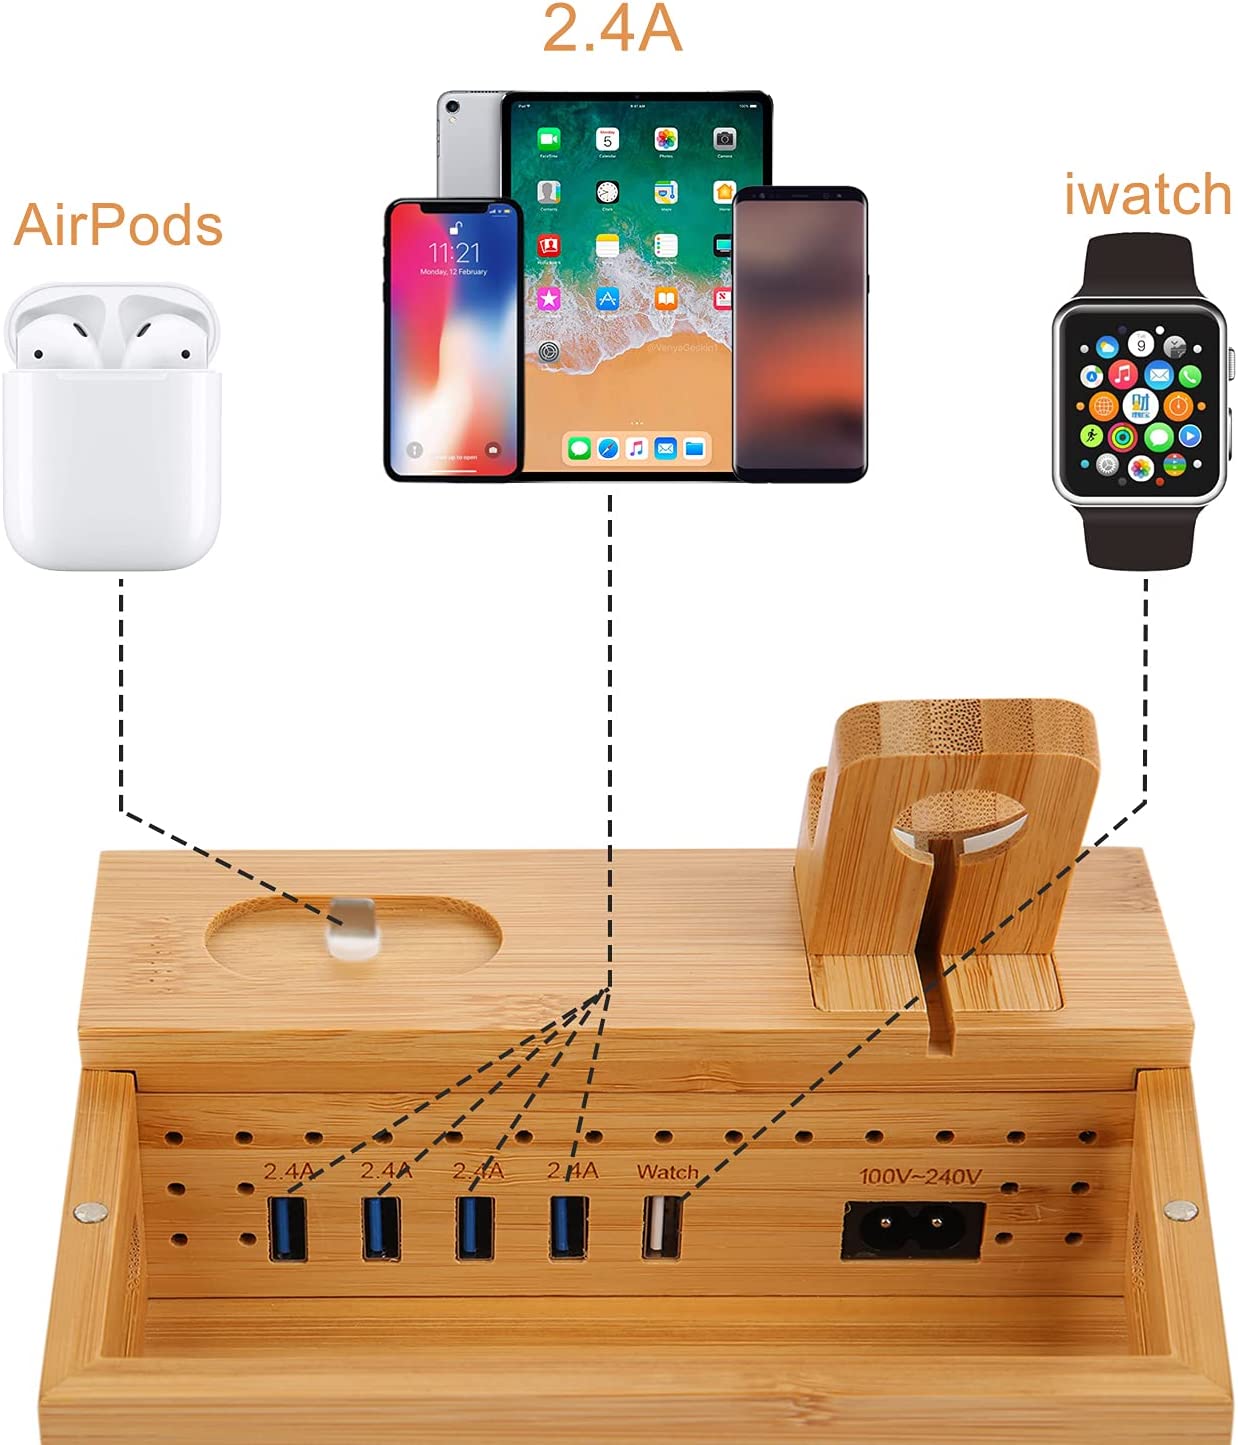 Bamboo Charging Station for Multi Device With 5 USB Charger Port Sendowtek 6 in 1 USB Charging Stand for Phone Tablet Smart Watch Holder